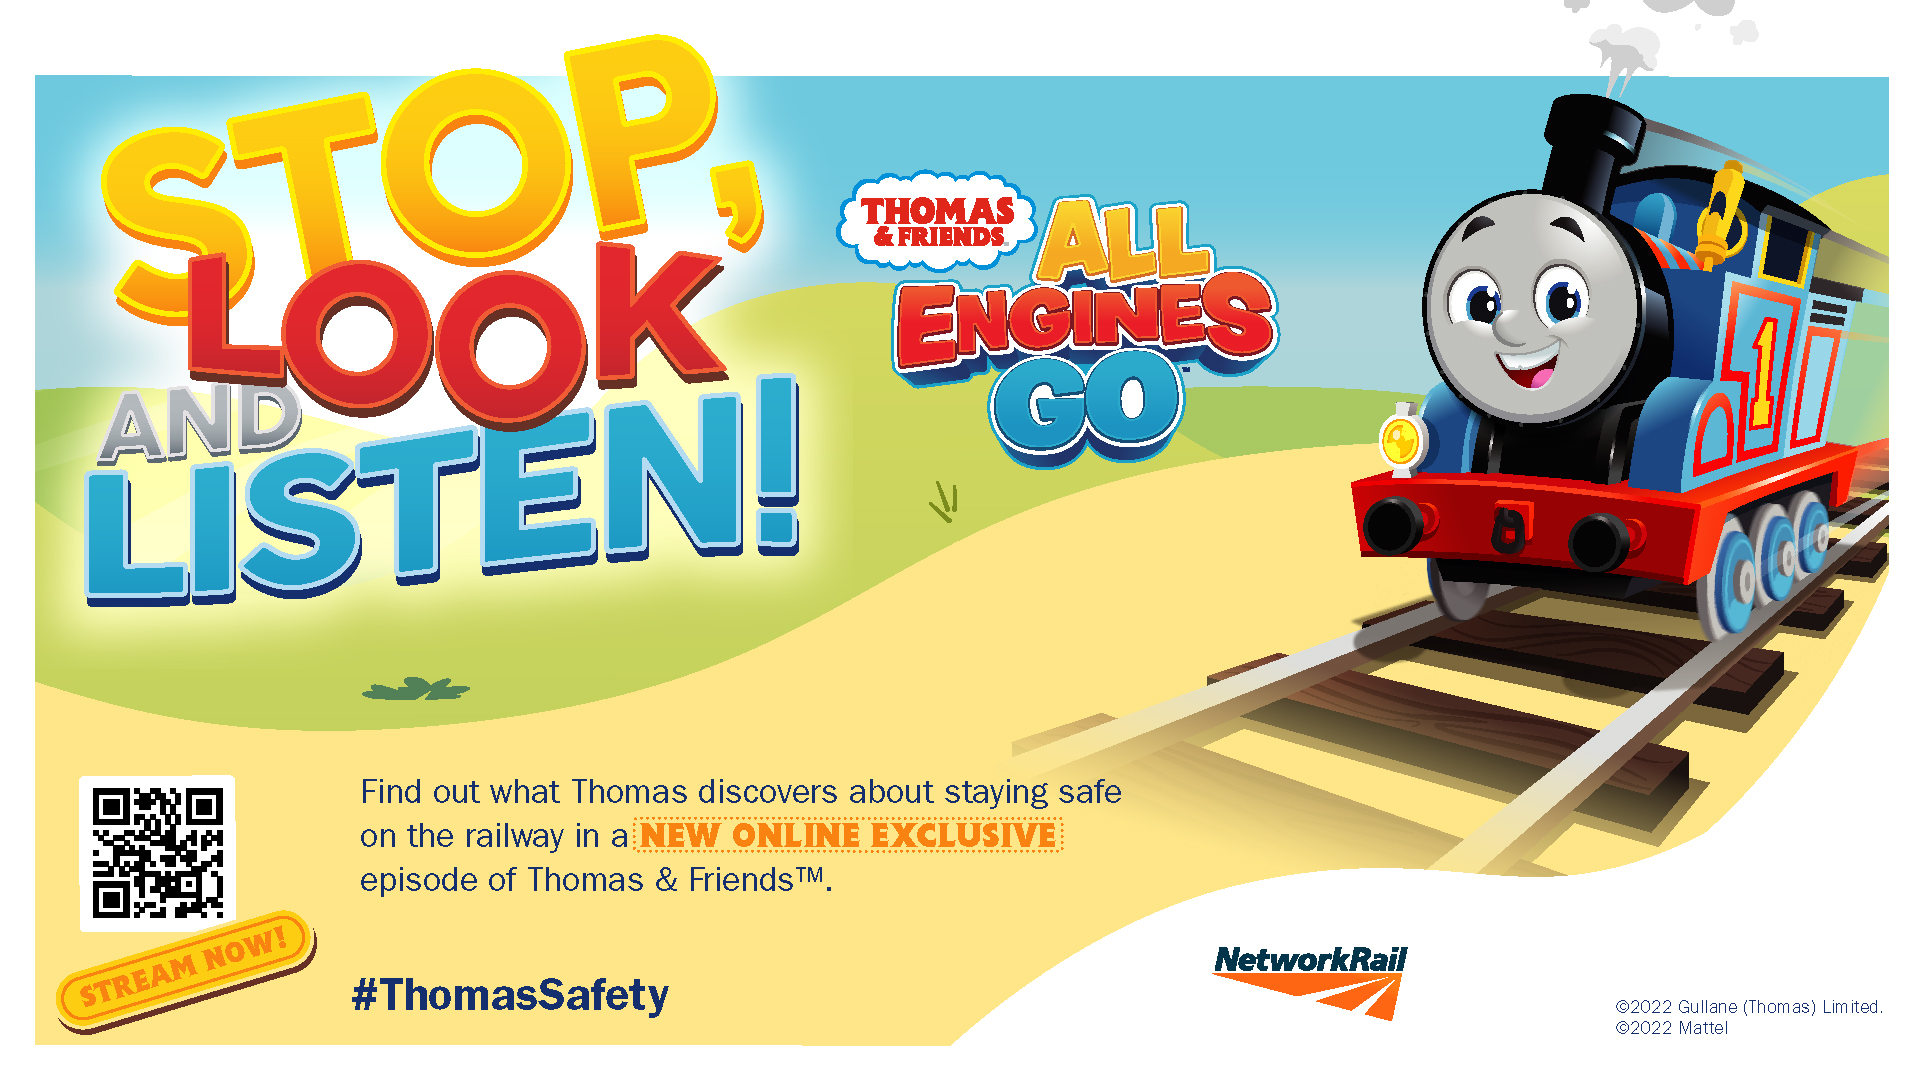 Thomas & Friends® make special trip to London to teach kids about rail safety